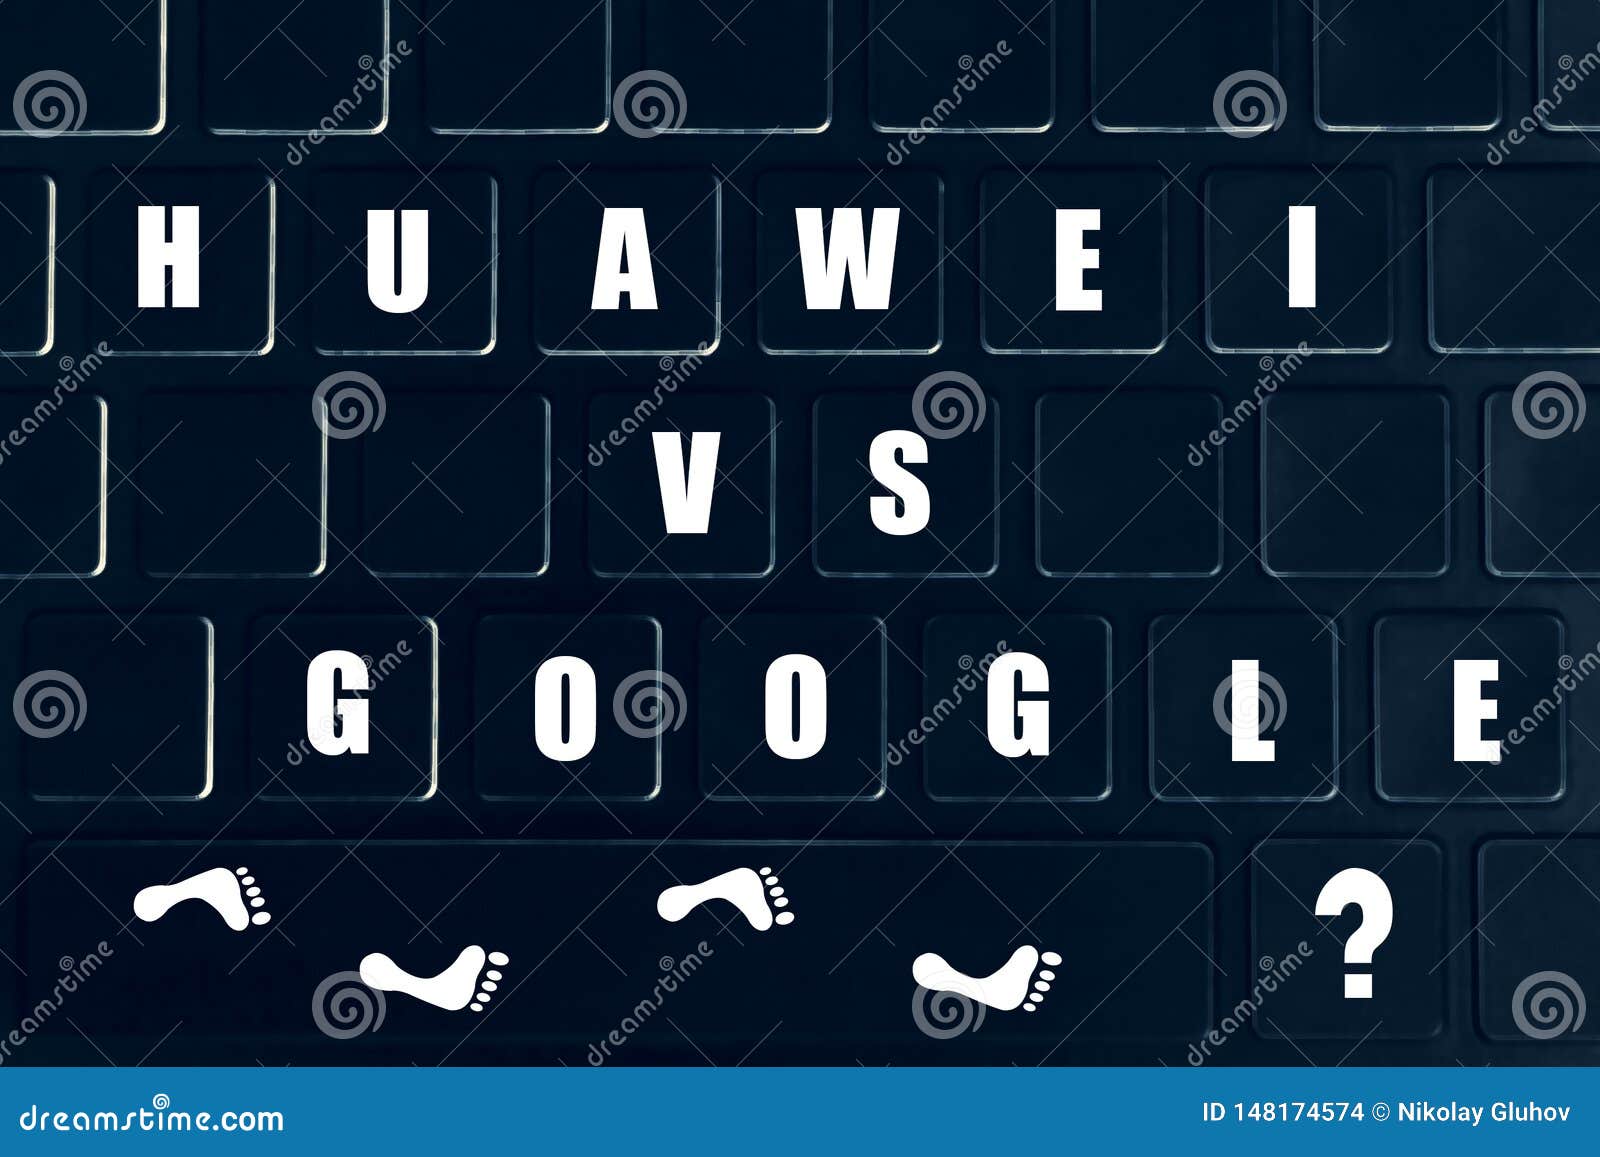 Huawei Vs Google Inscription On The Keyboard The Confrontation Of World Giants Editorial Stock Image Image Of Font Internet 148174574